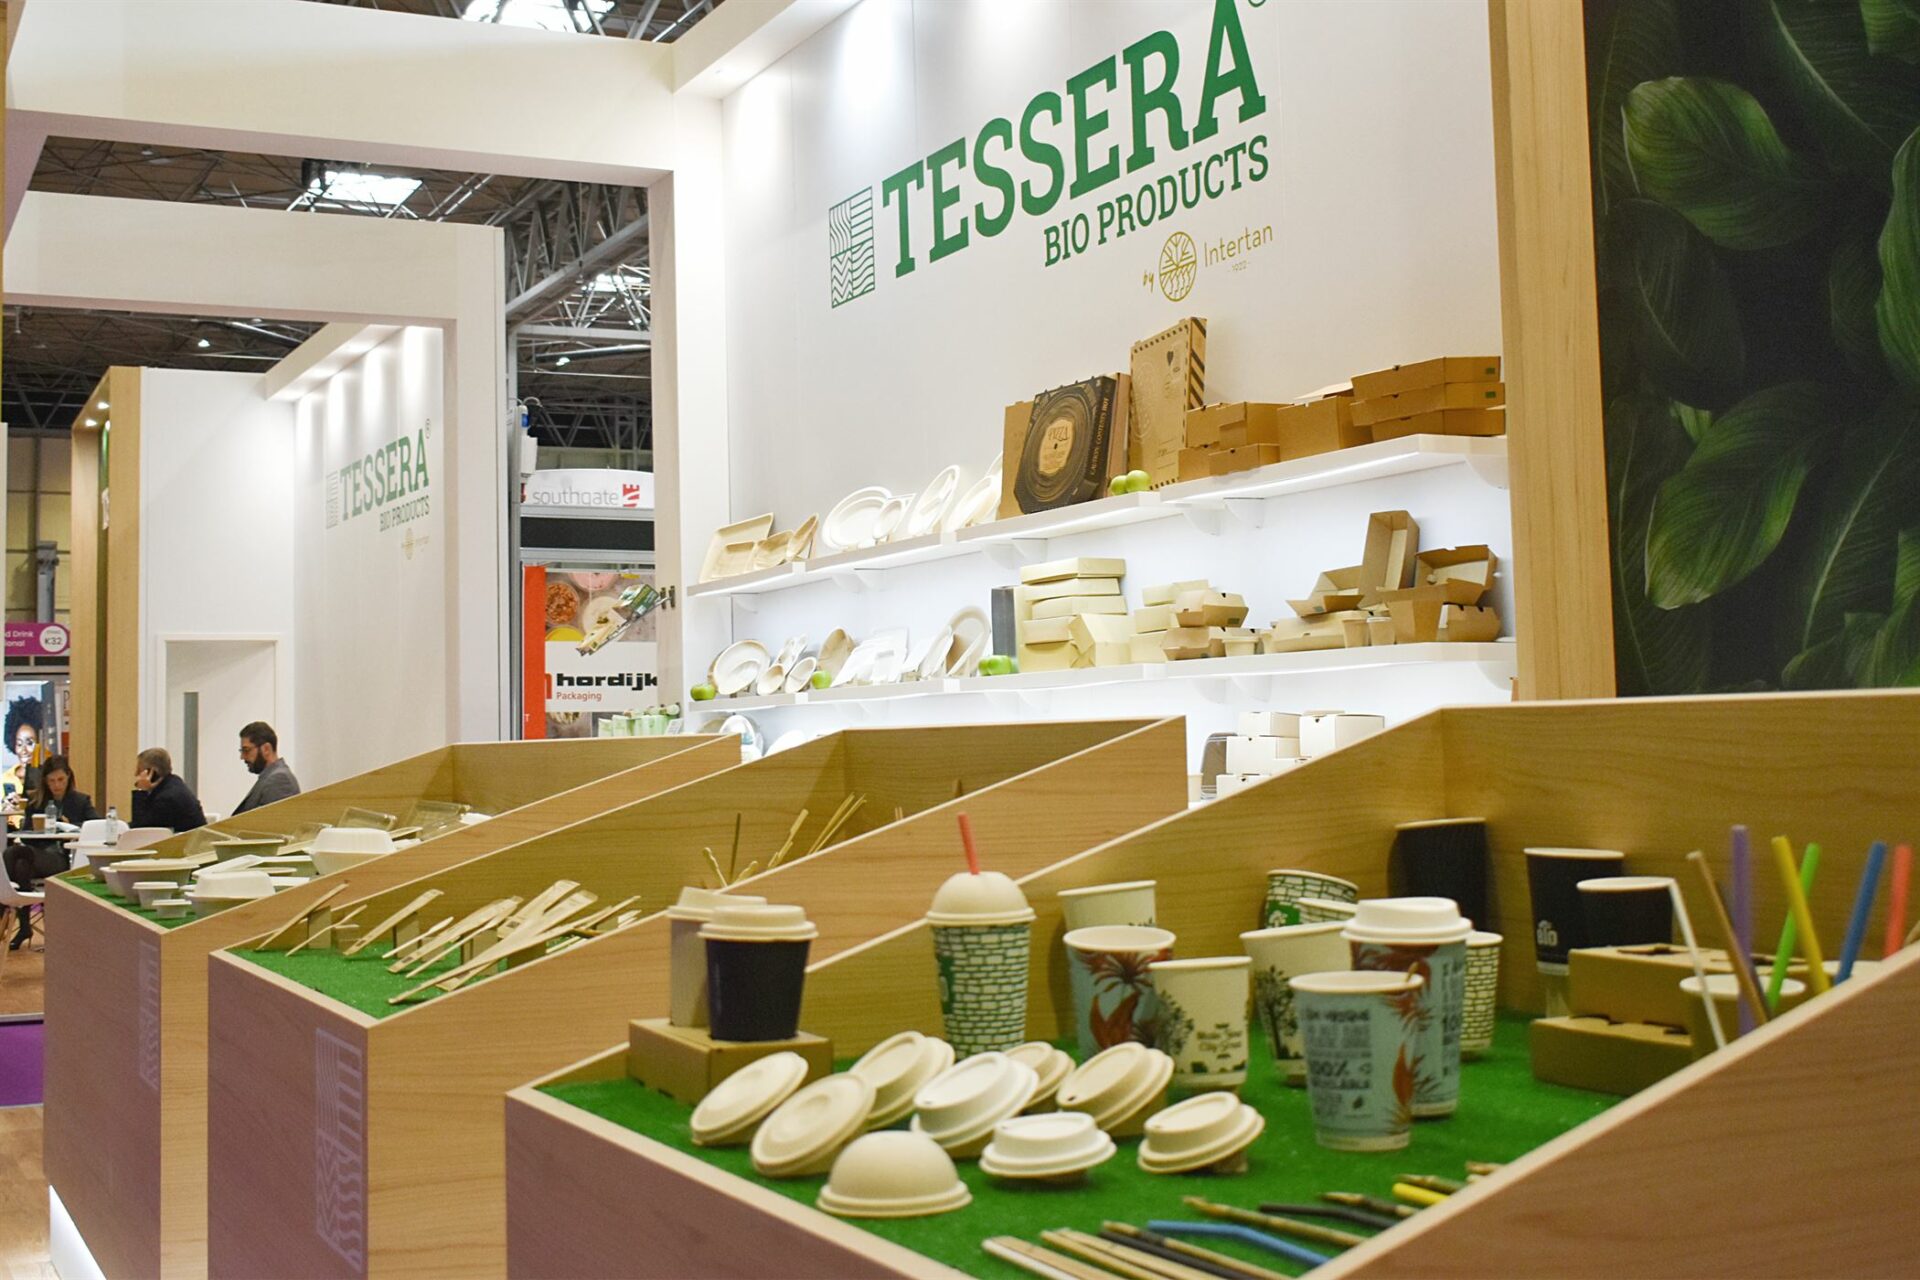 TESSERA Bio Products® in the UK for Packaging Innovations Expo | TESSERA Bio Products®